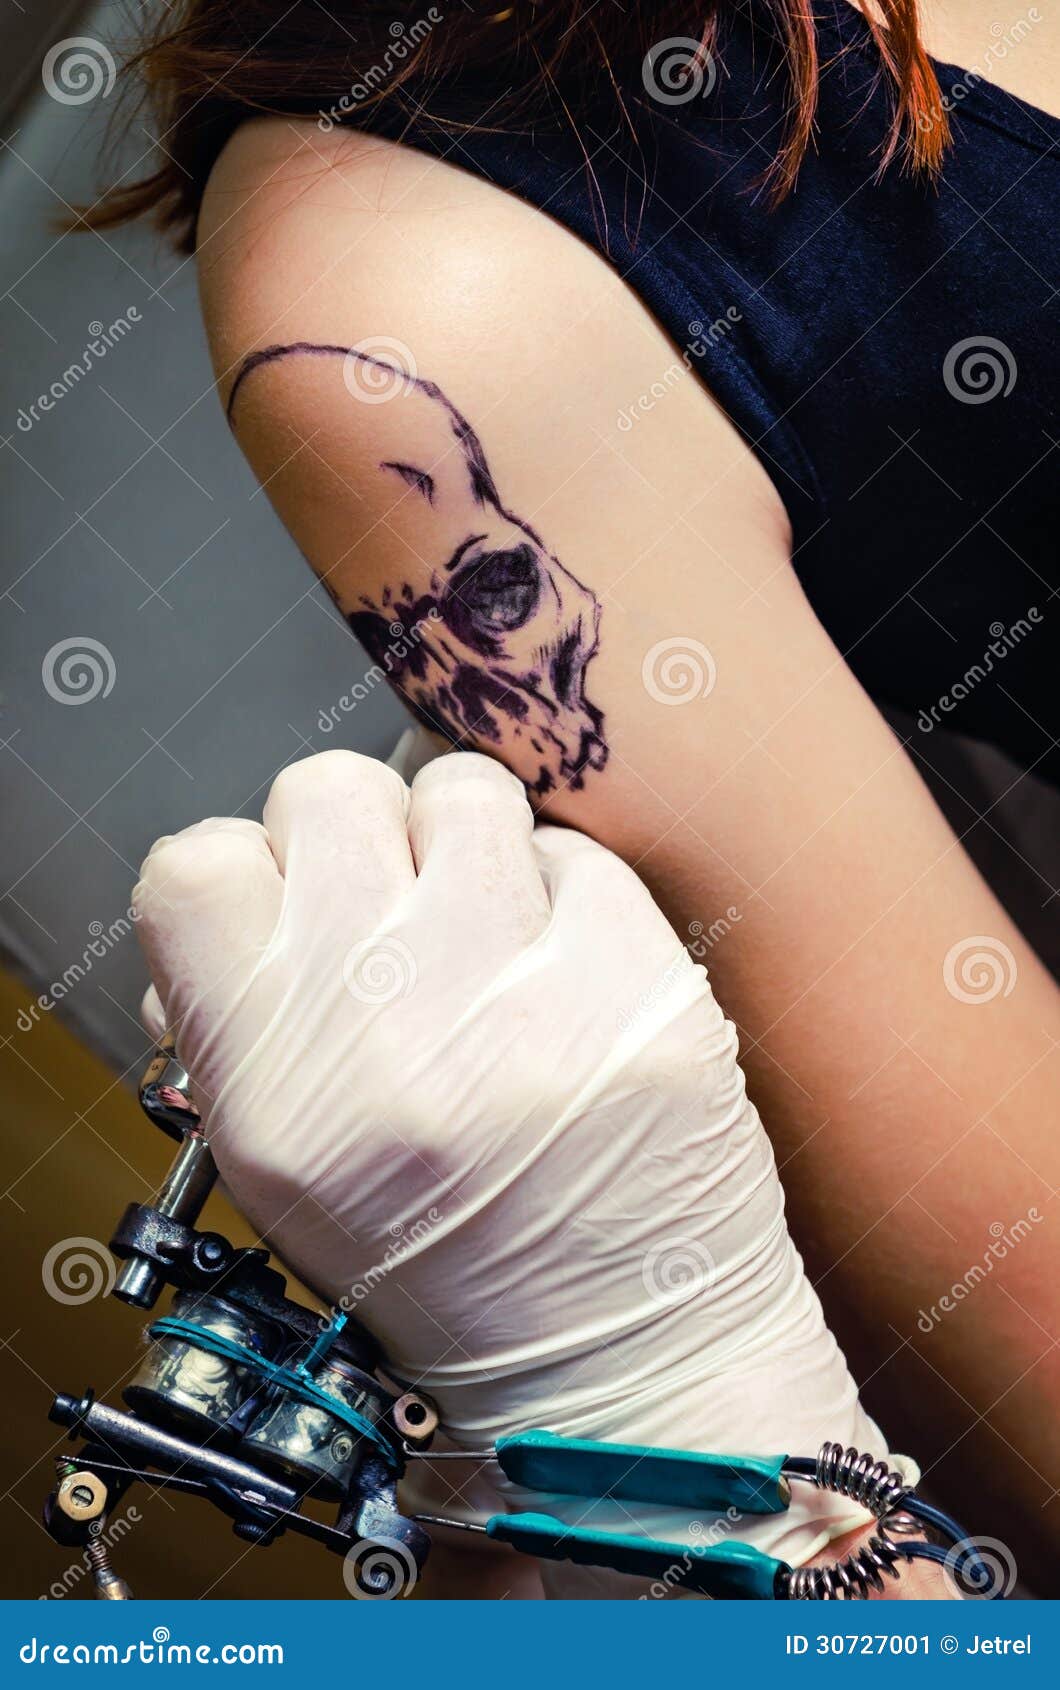 Process of Making Tattoo on a Girl S Shoulder Stock Image - Image of body,  hold: 30727001